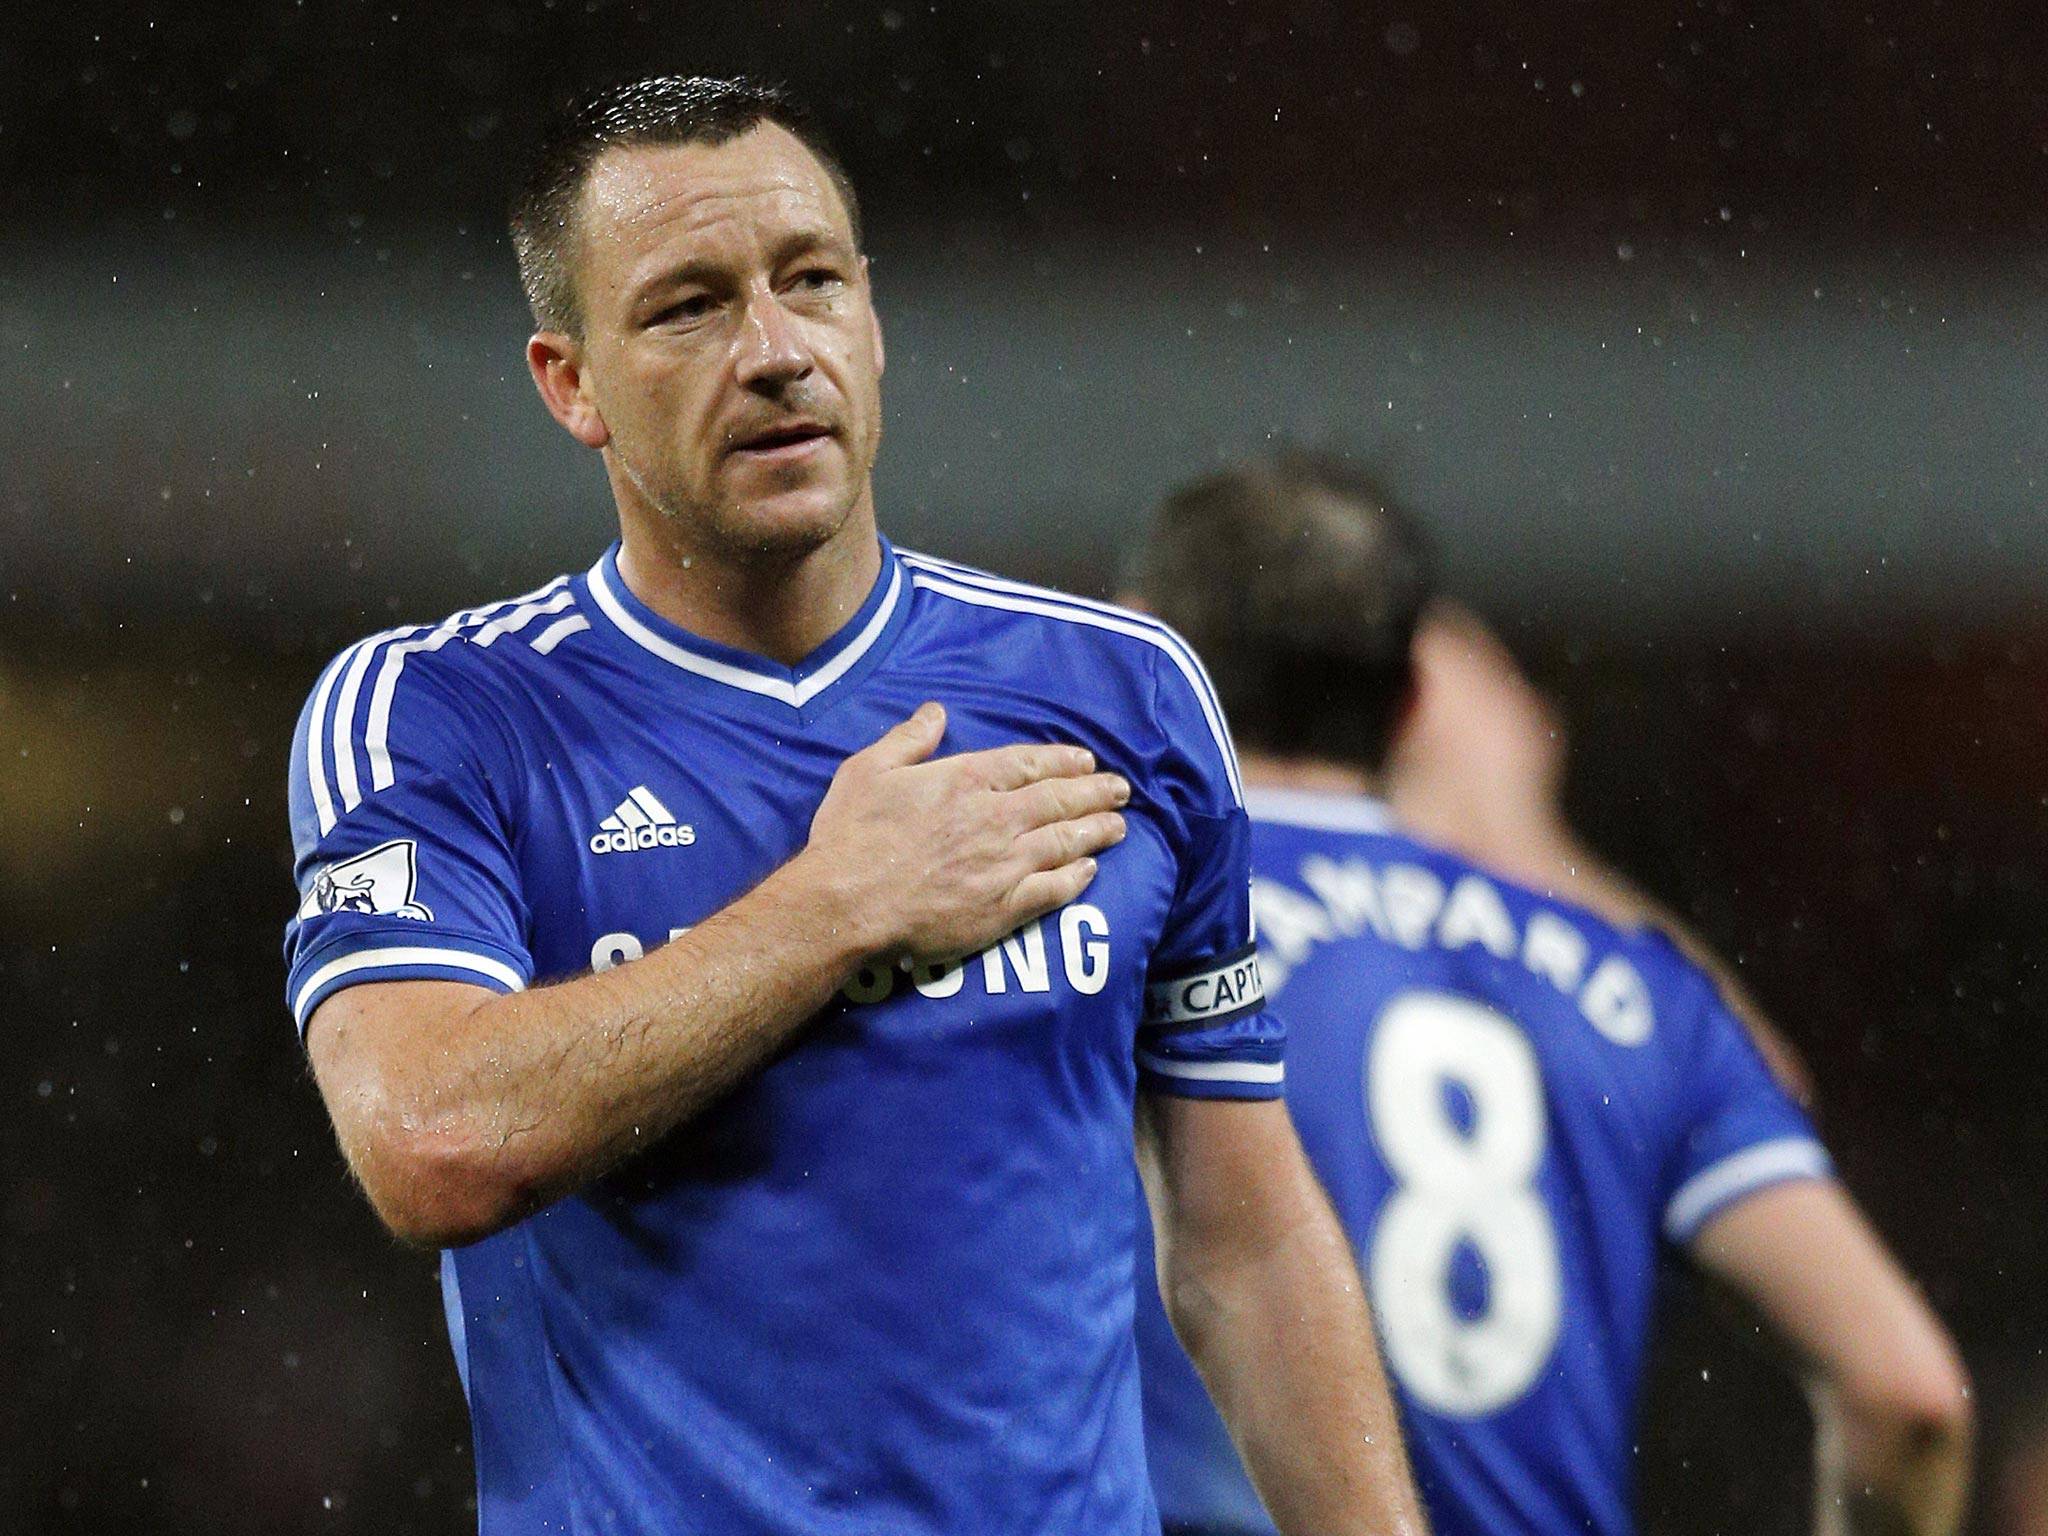 Twitter erupts as John Terry decides to retire from football